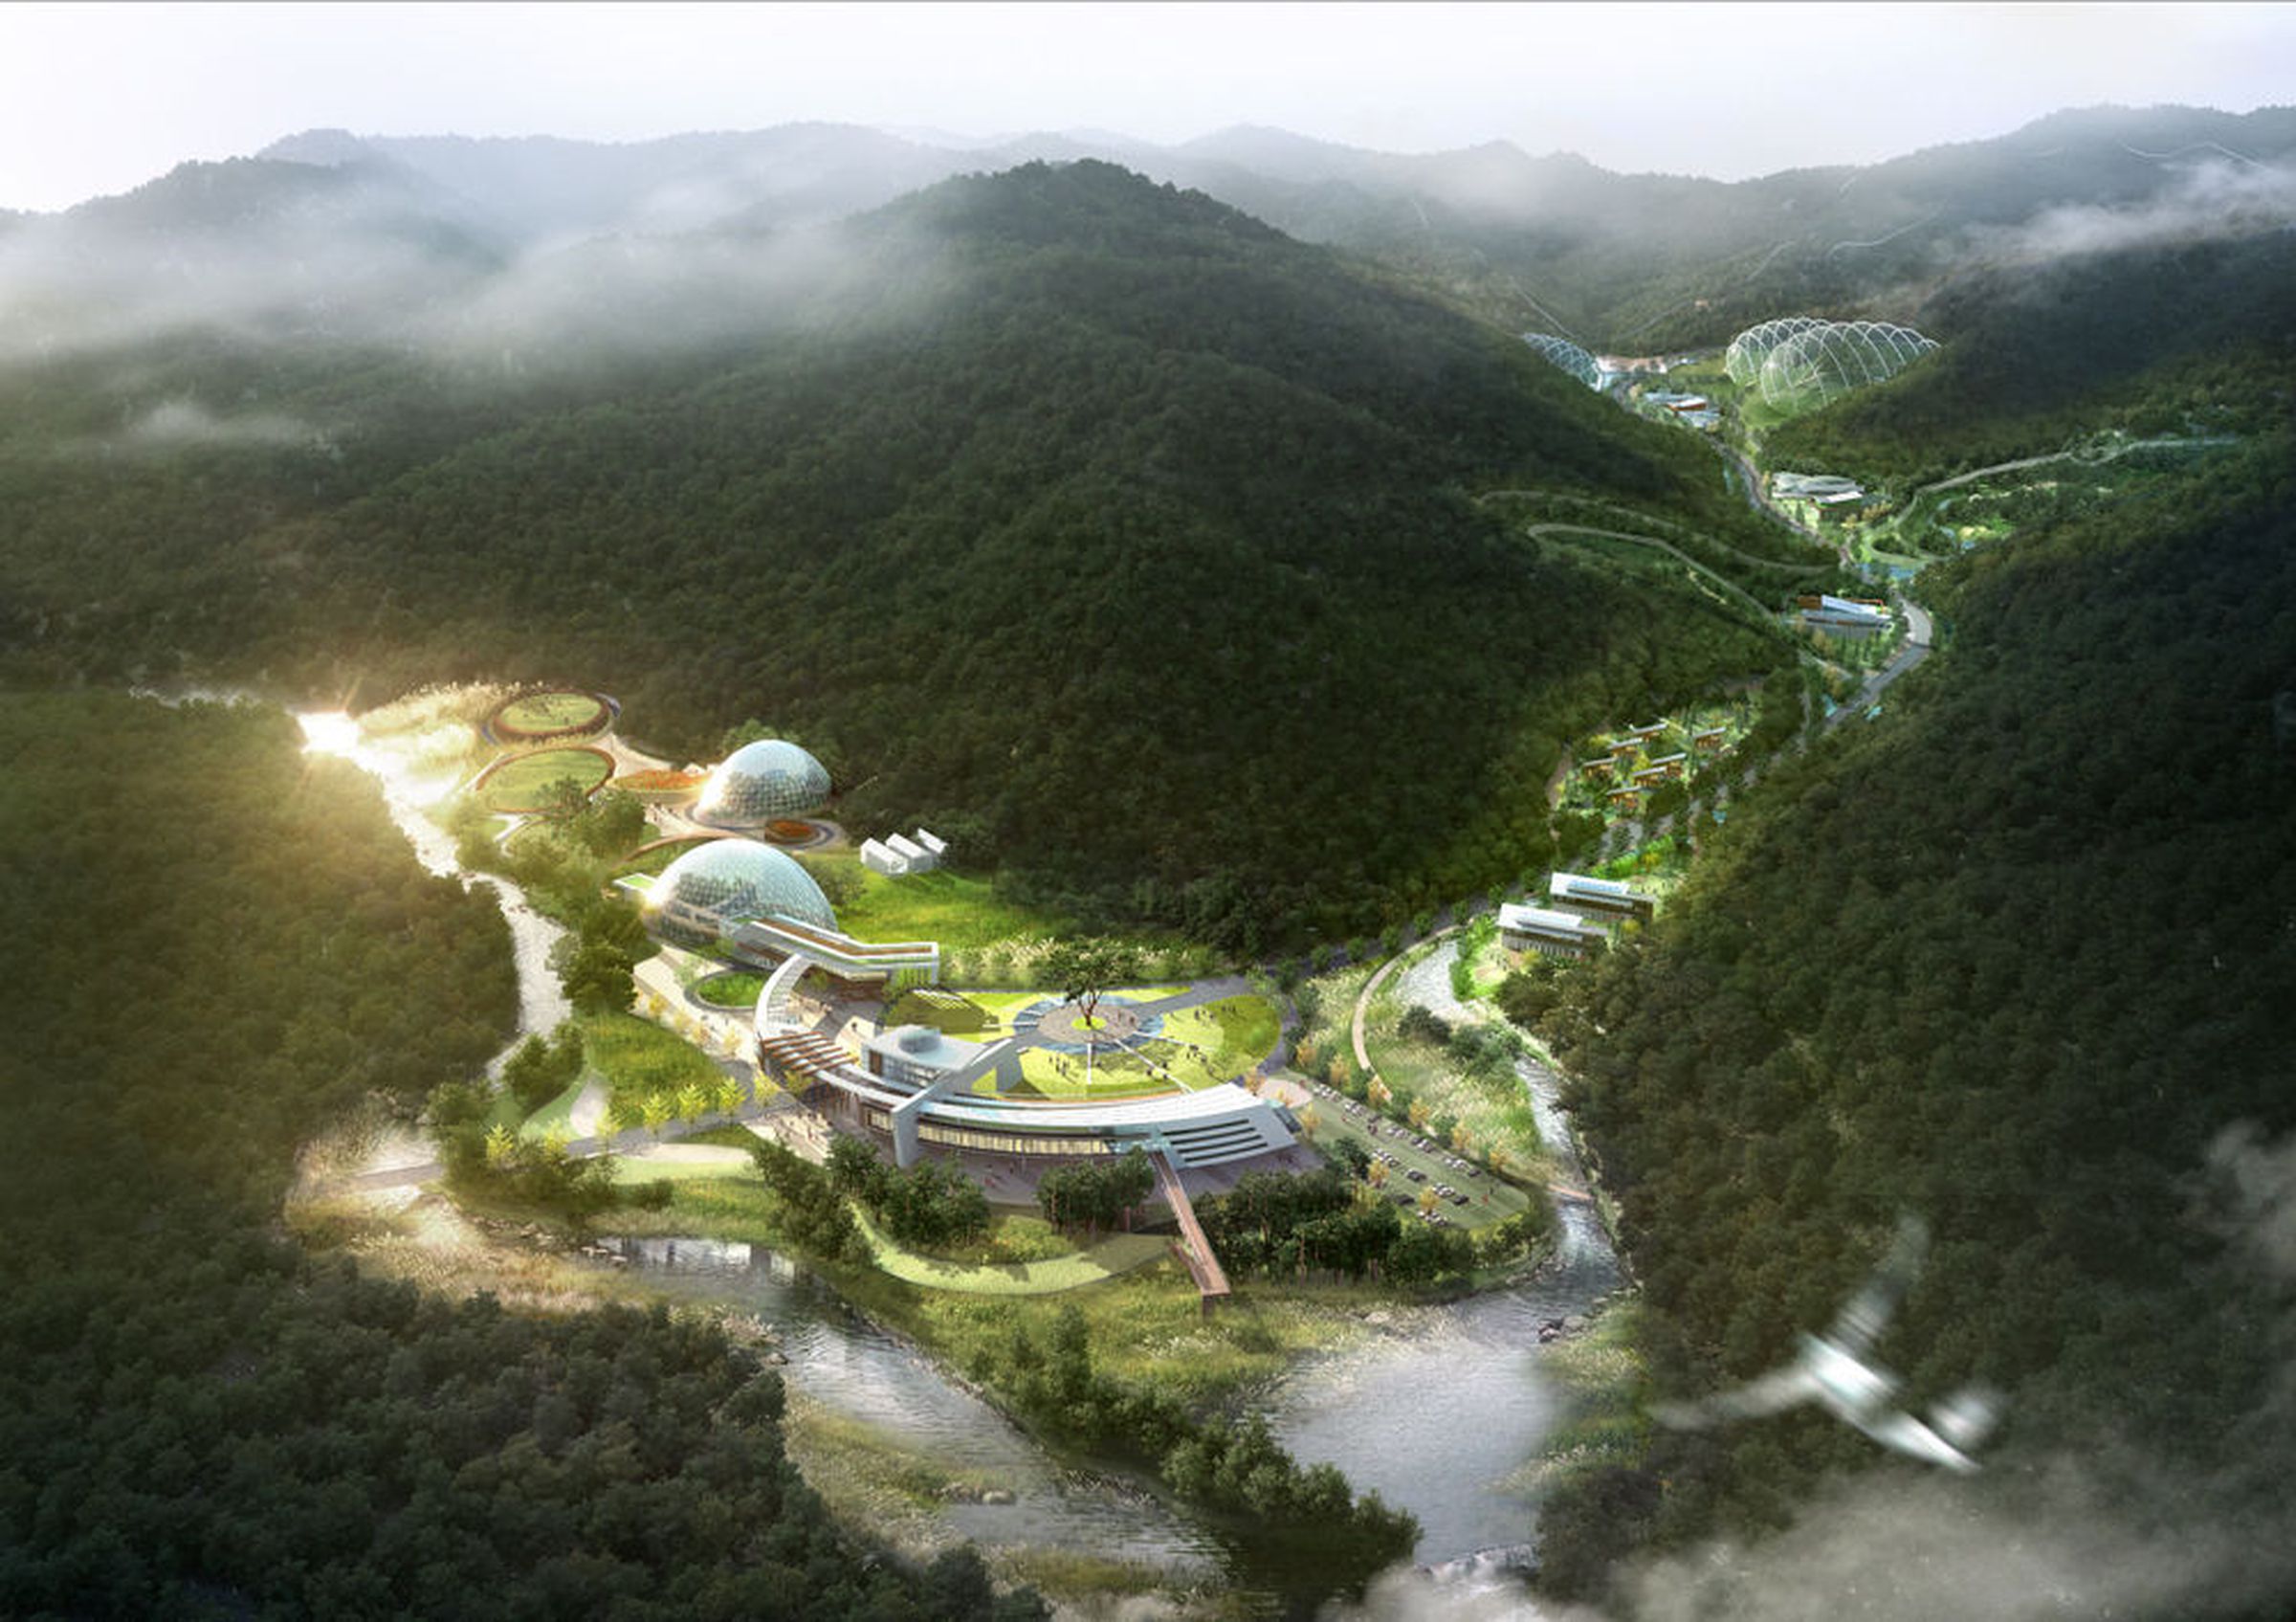 Samoo National Research Center for Endangered Species renders